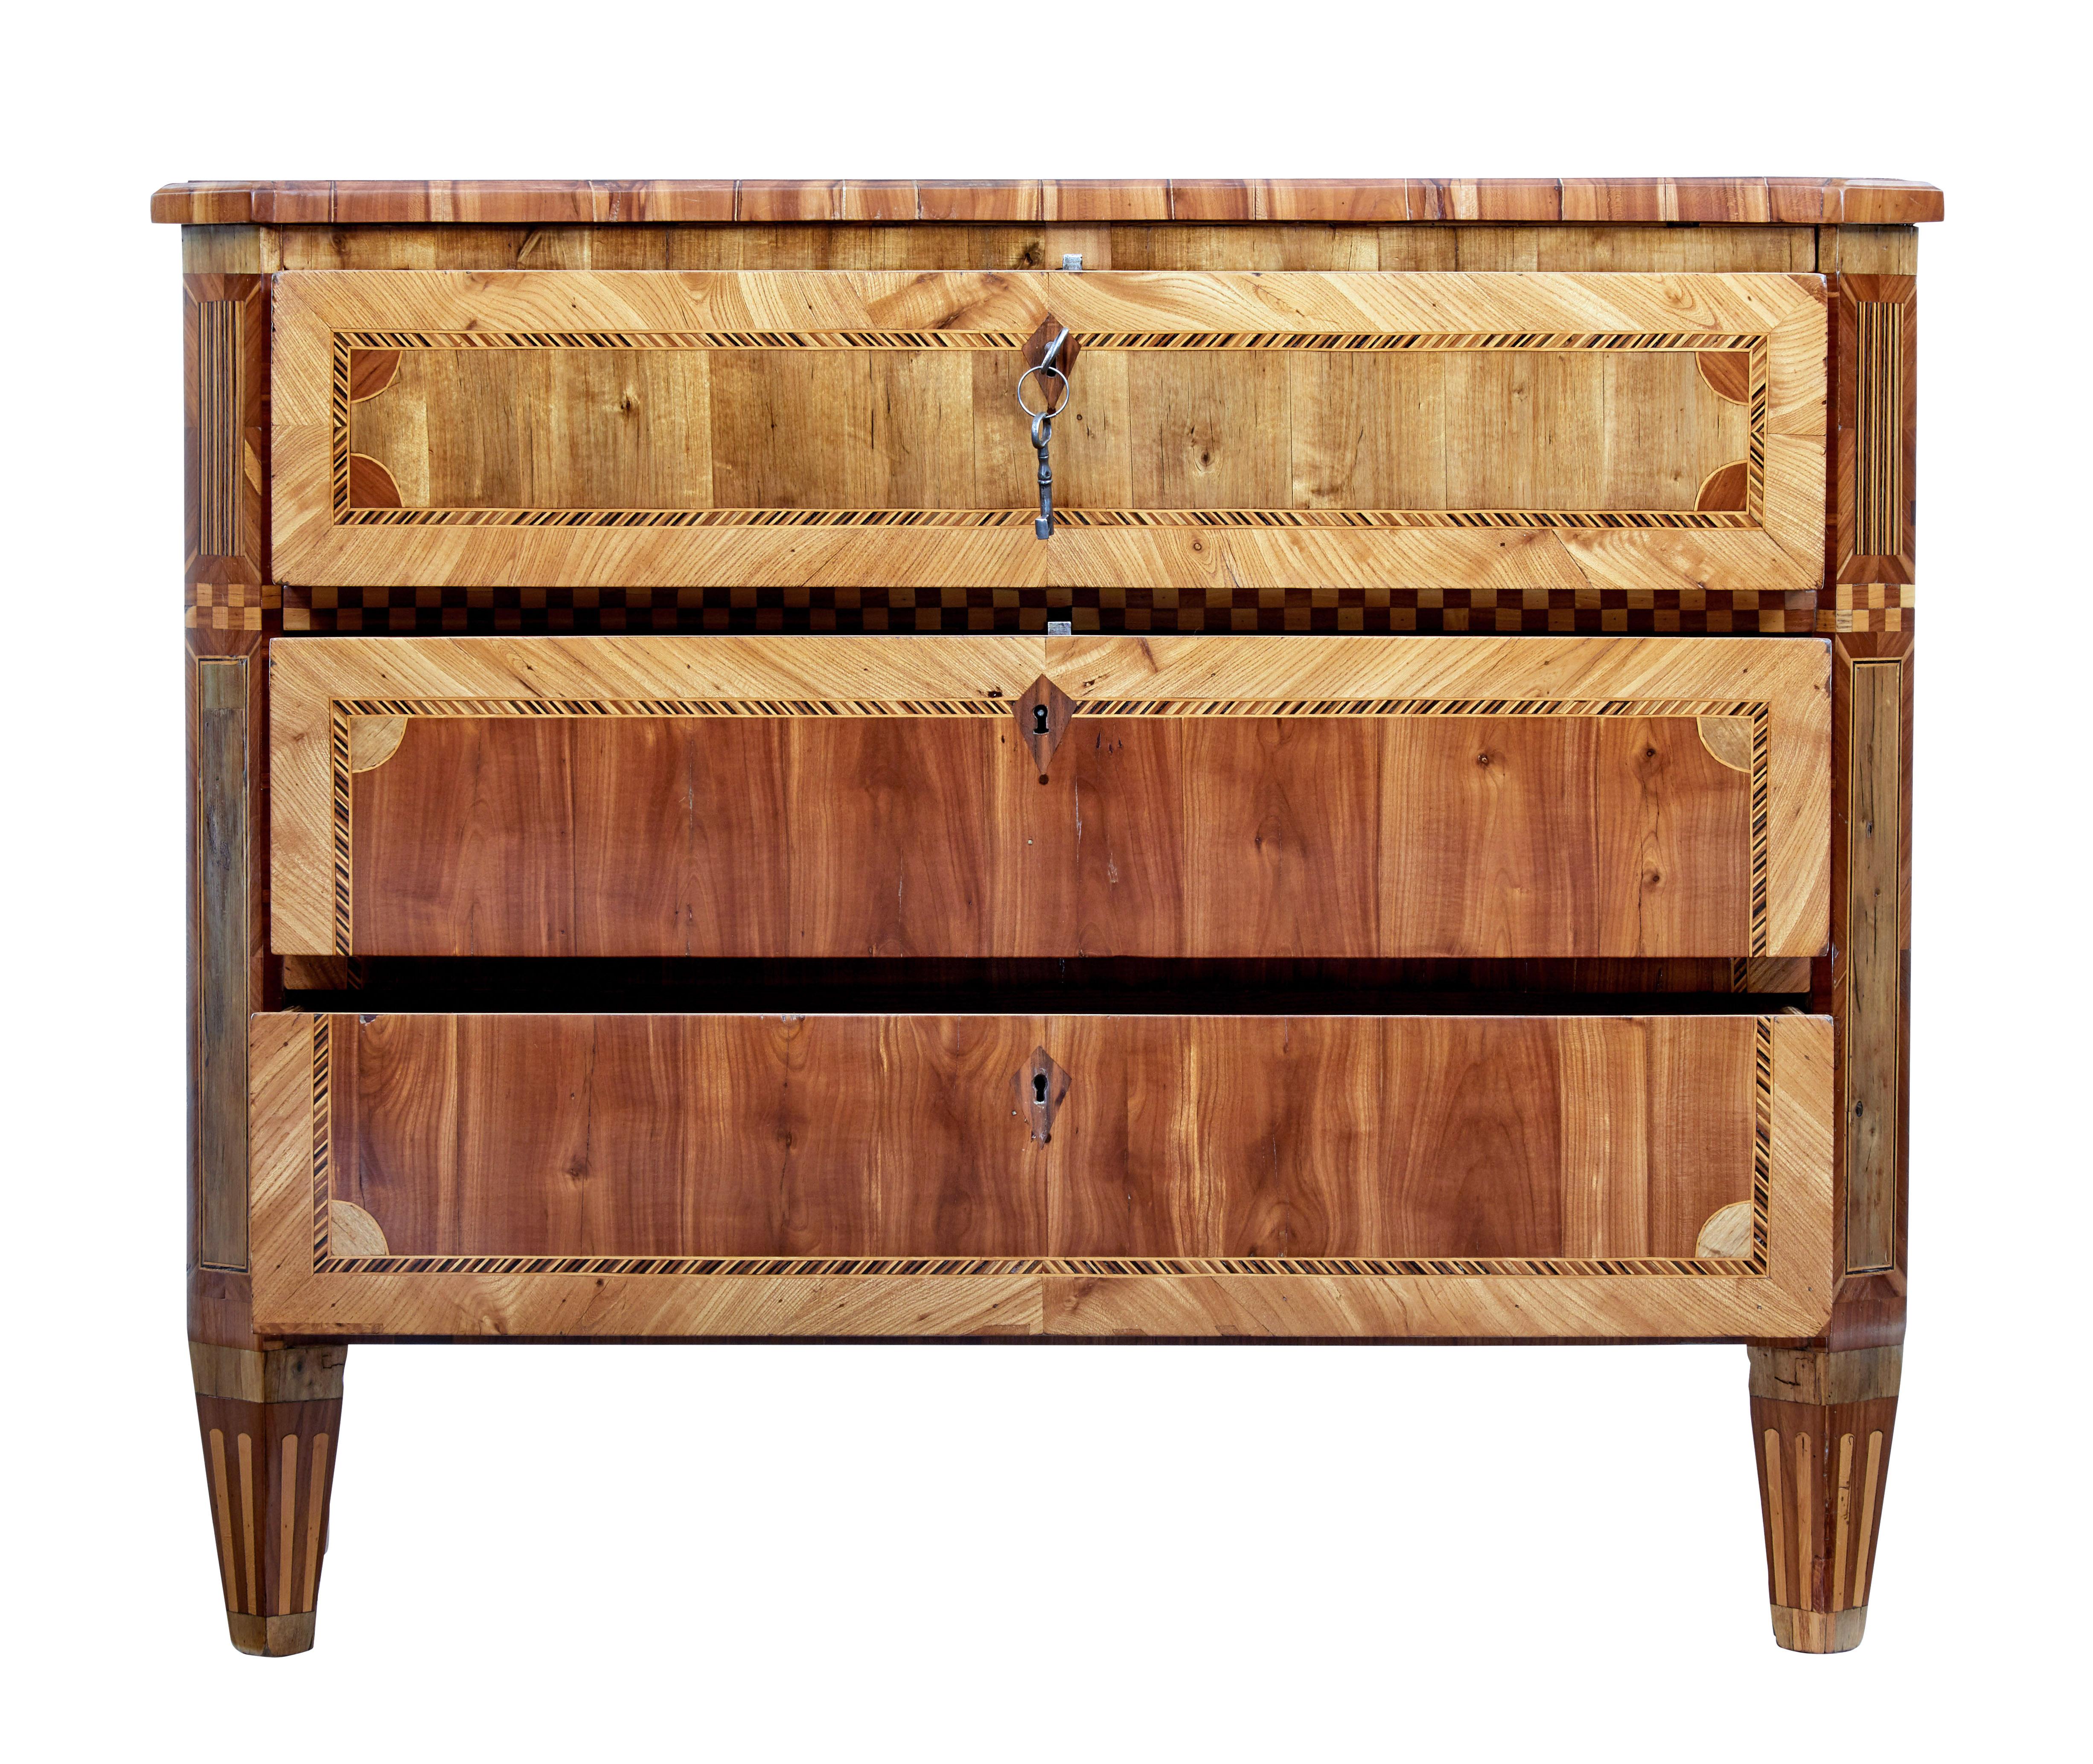 Swedish Early 19th Century Gustavian Inlaid Elm Chest of Drawers